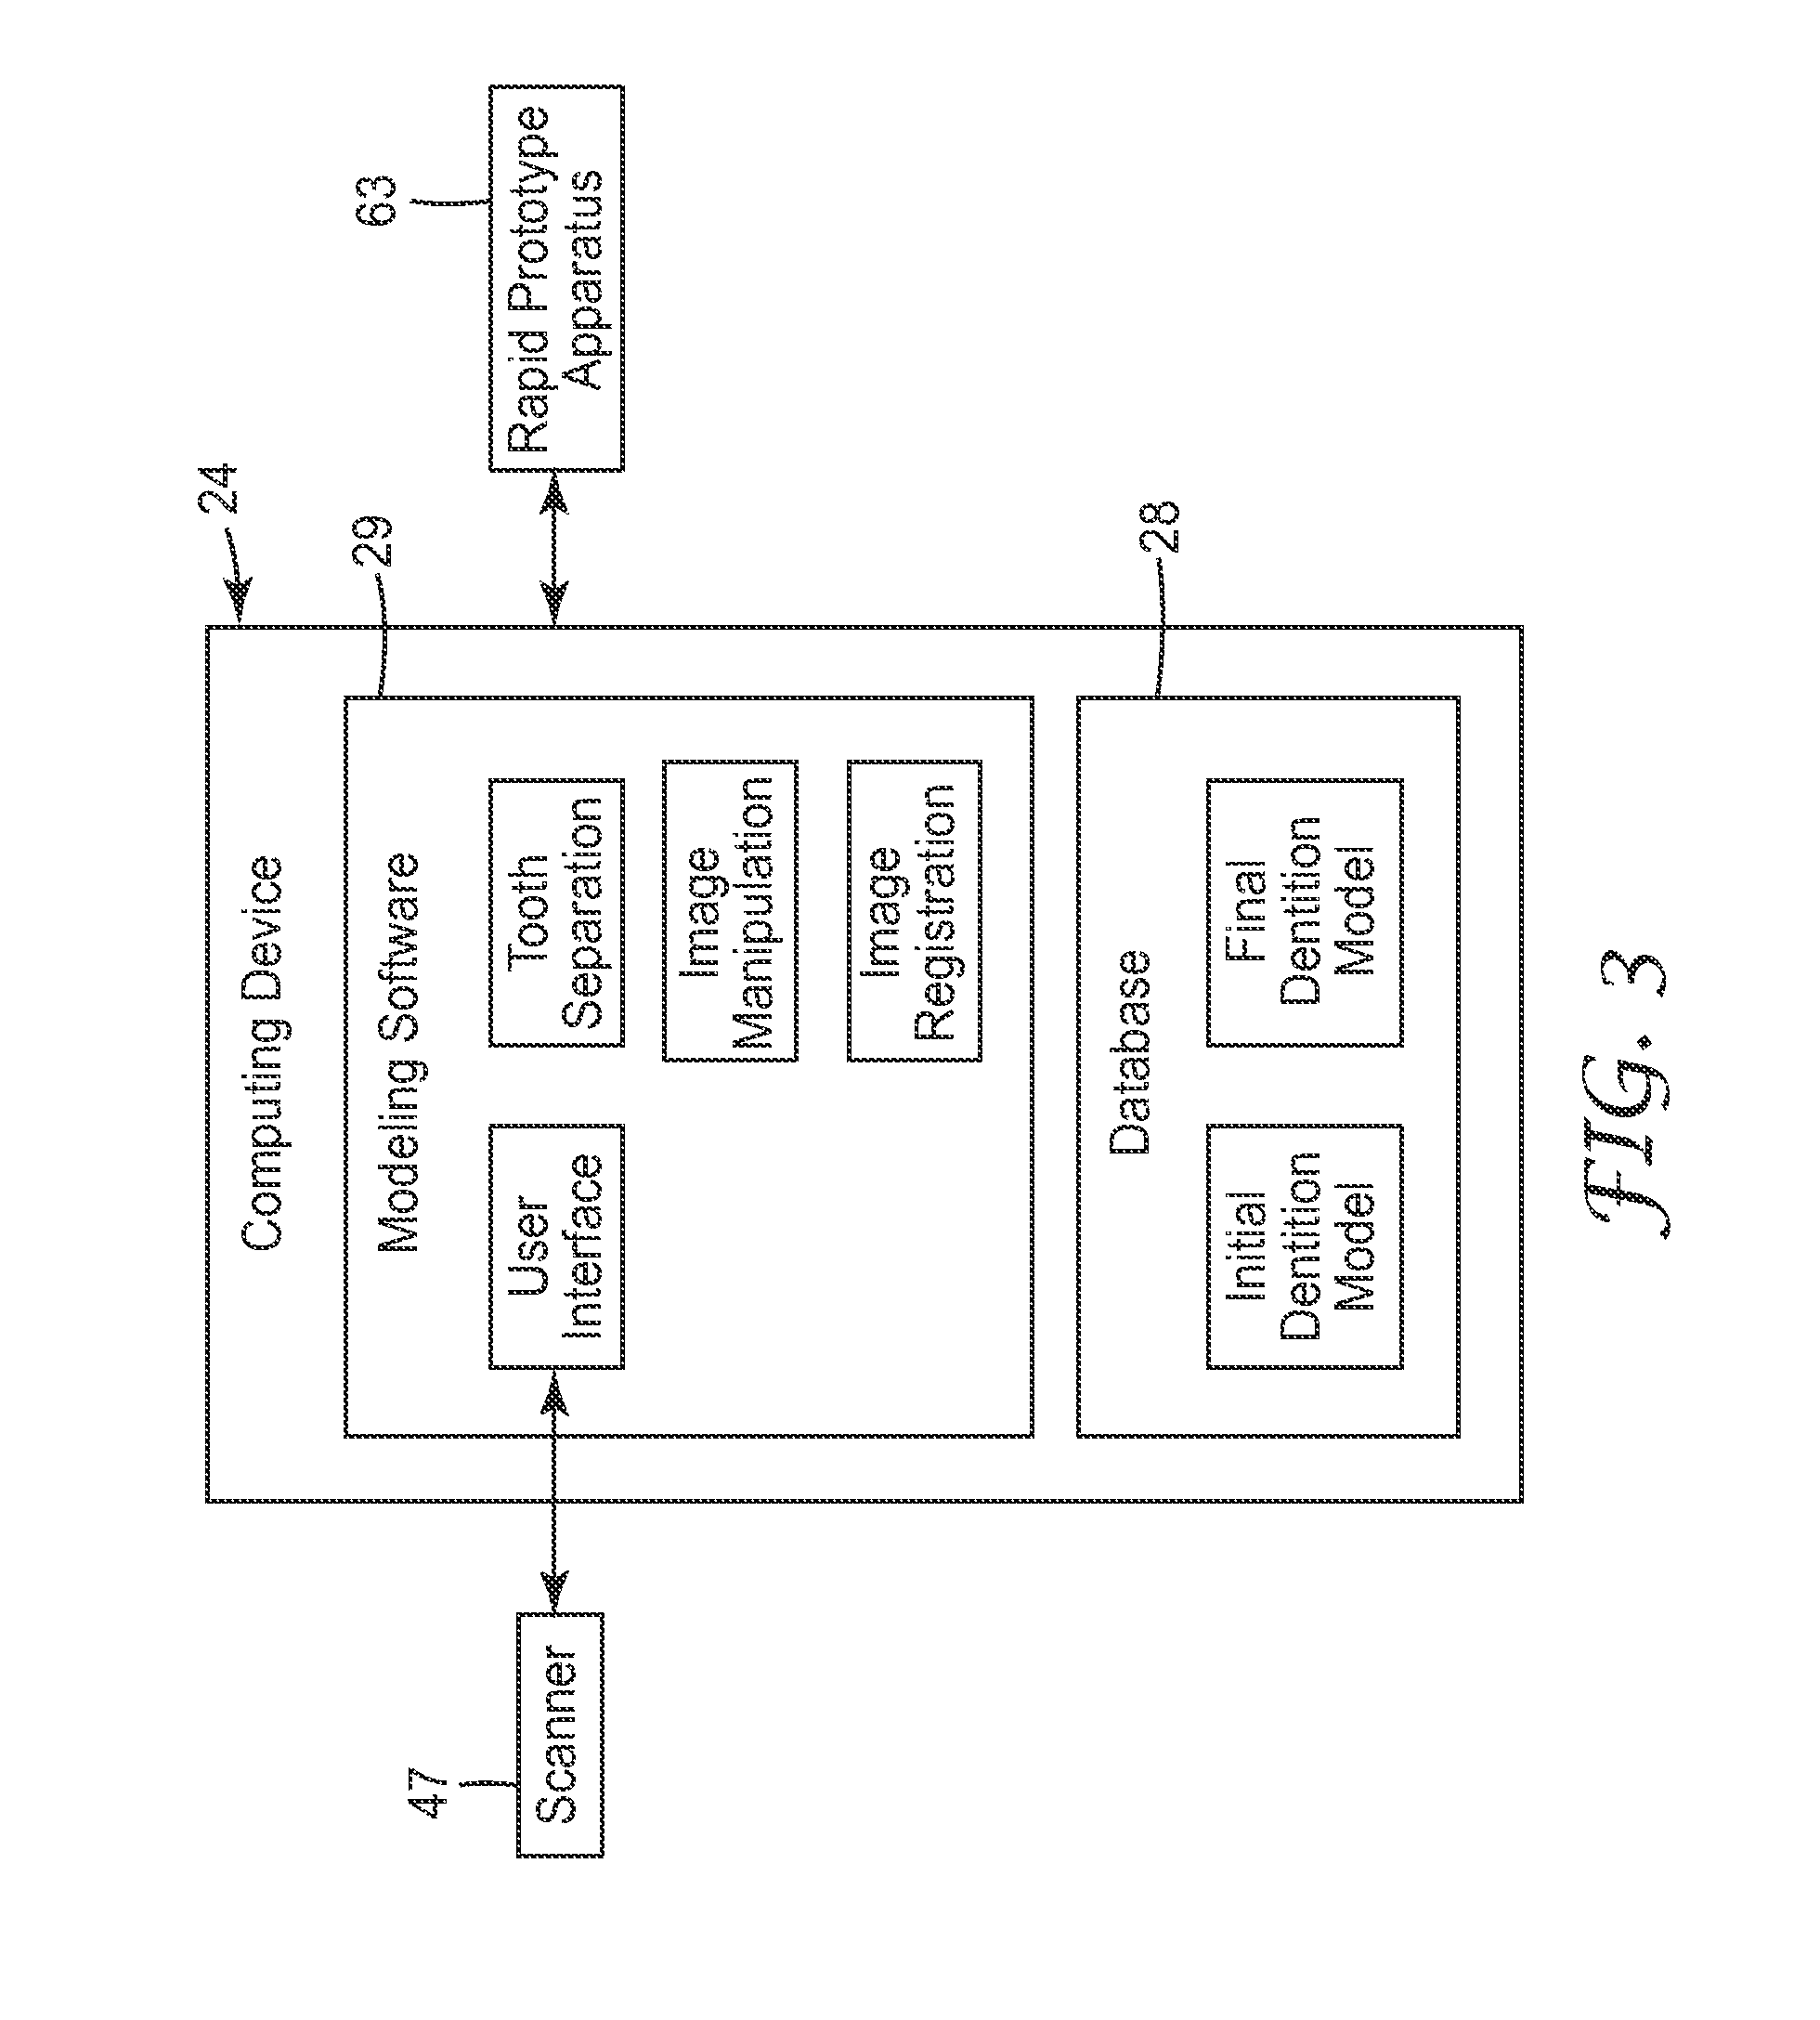 Methods of preparing a virtual dentition model and fabricating a dental retainer therefrom